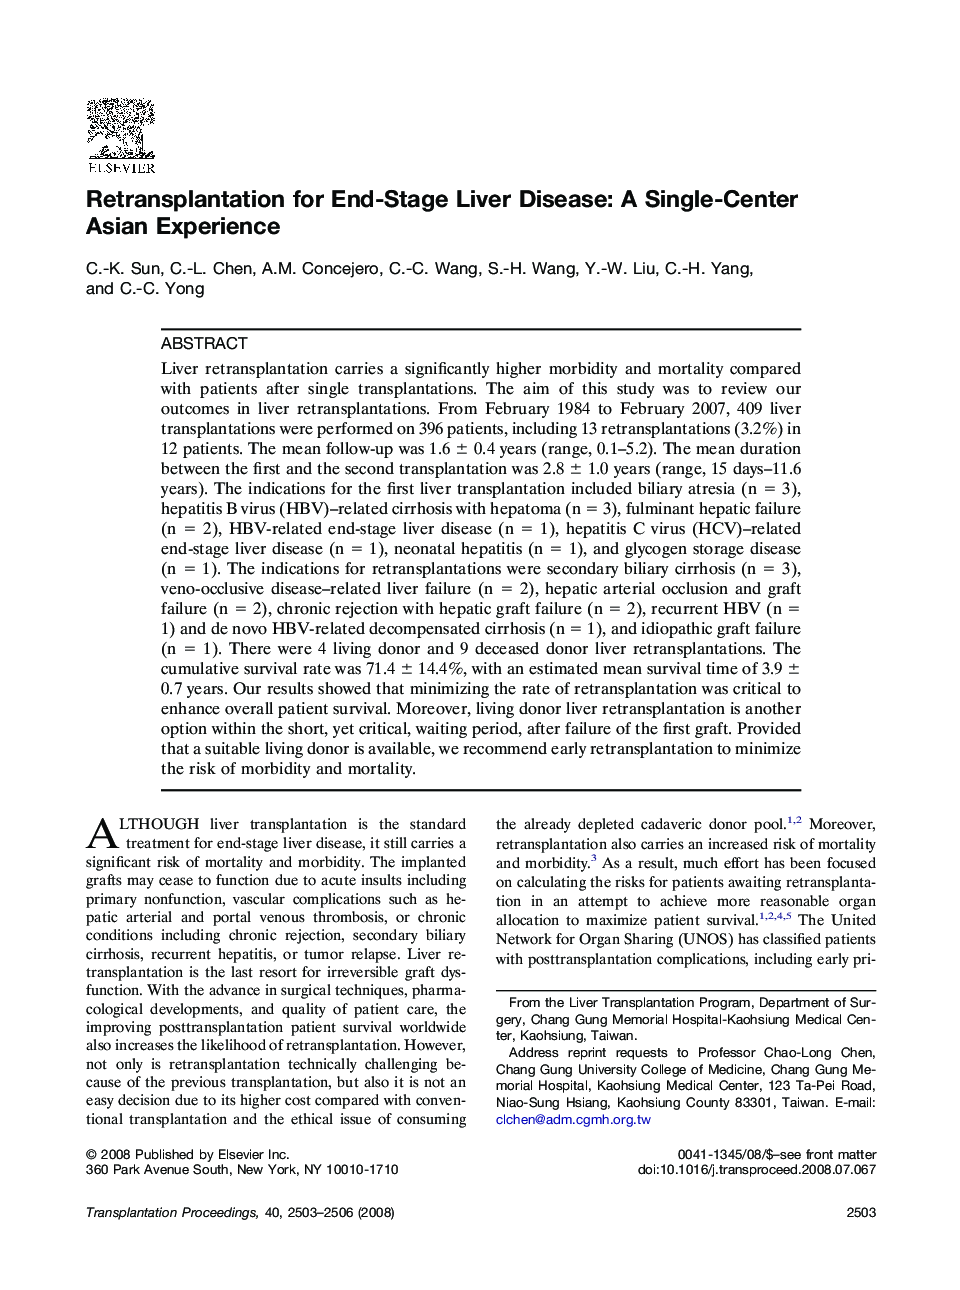 Retransplantation for End-Stage Liver Disease: A Single-Center Asian Experience